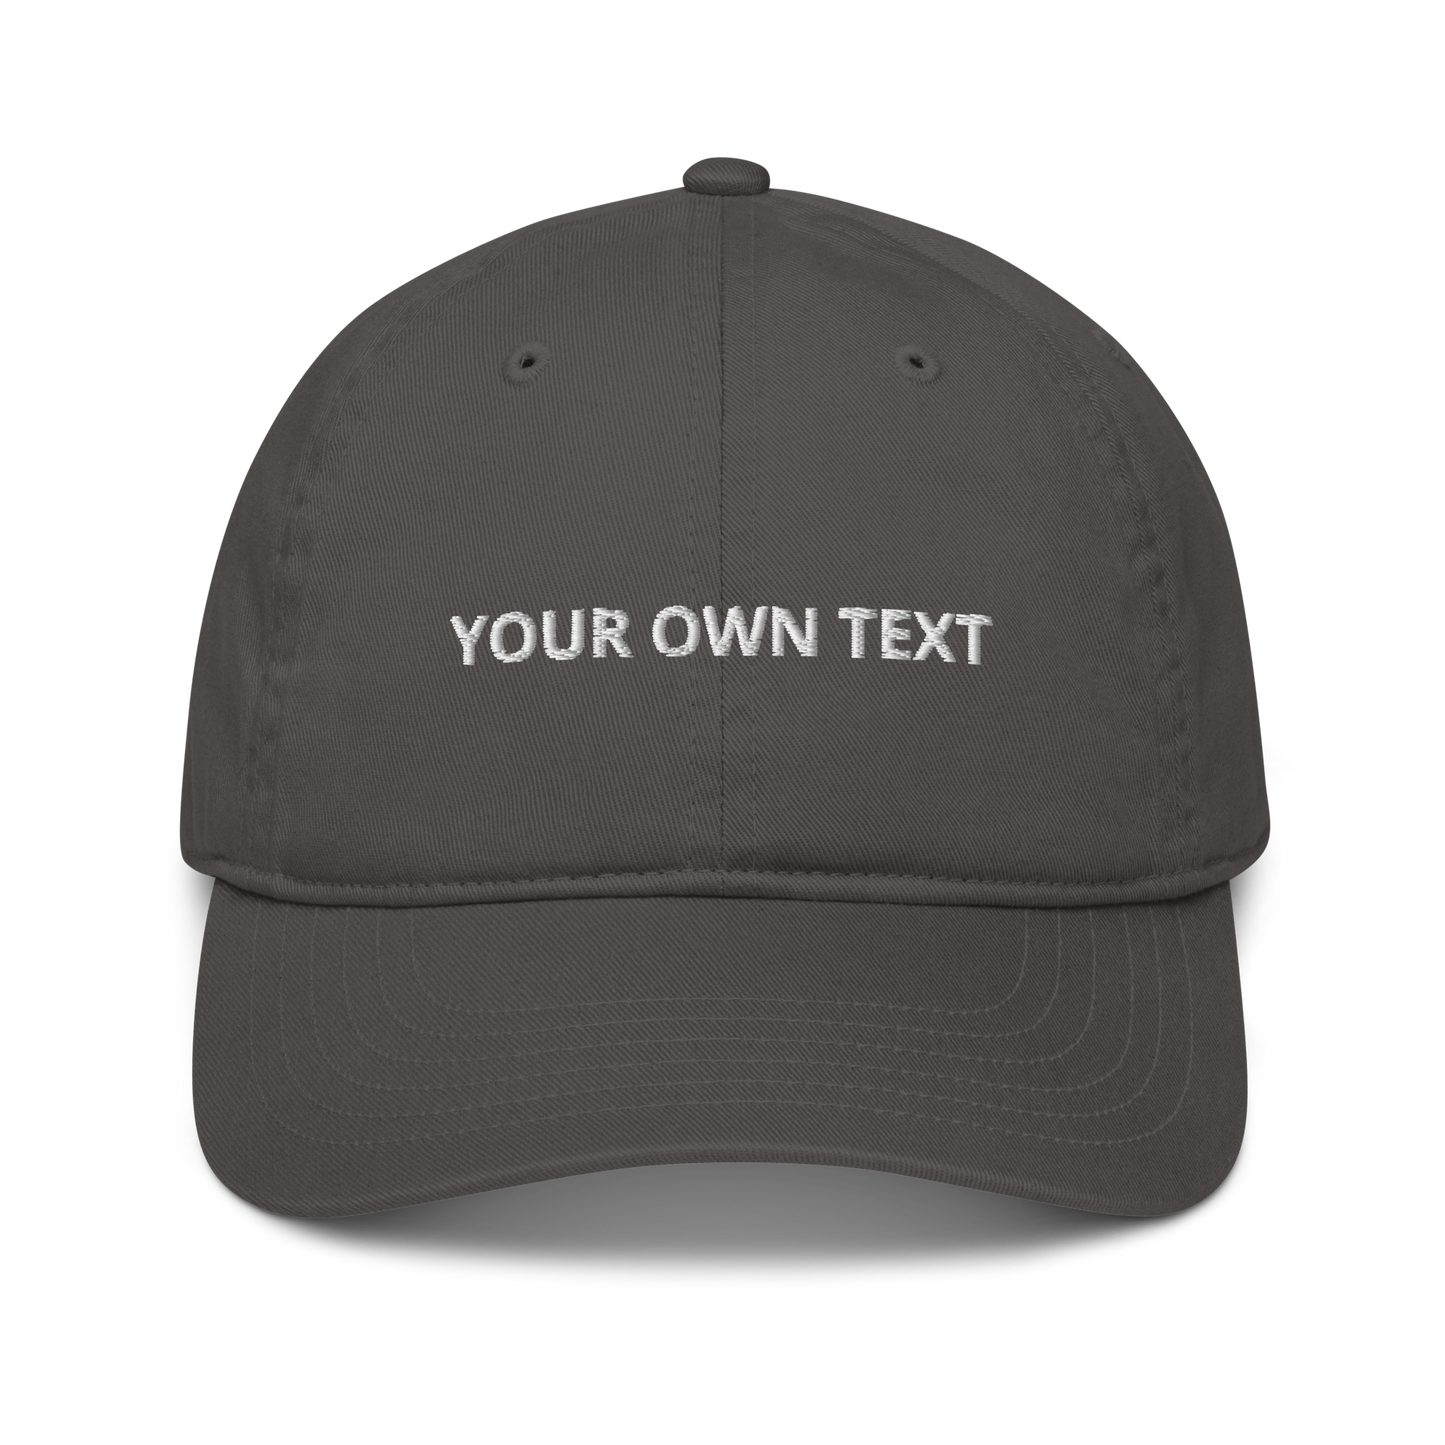 Your Own Text - Organic dad hat